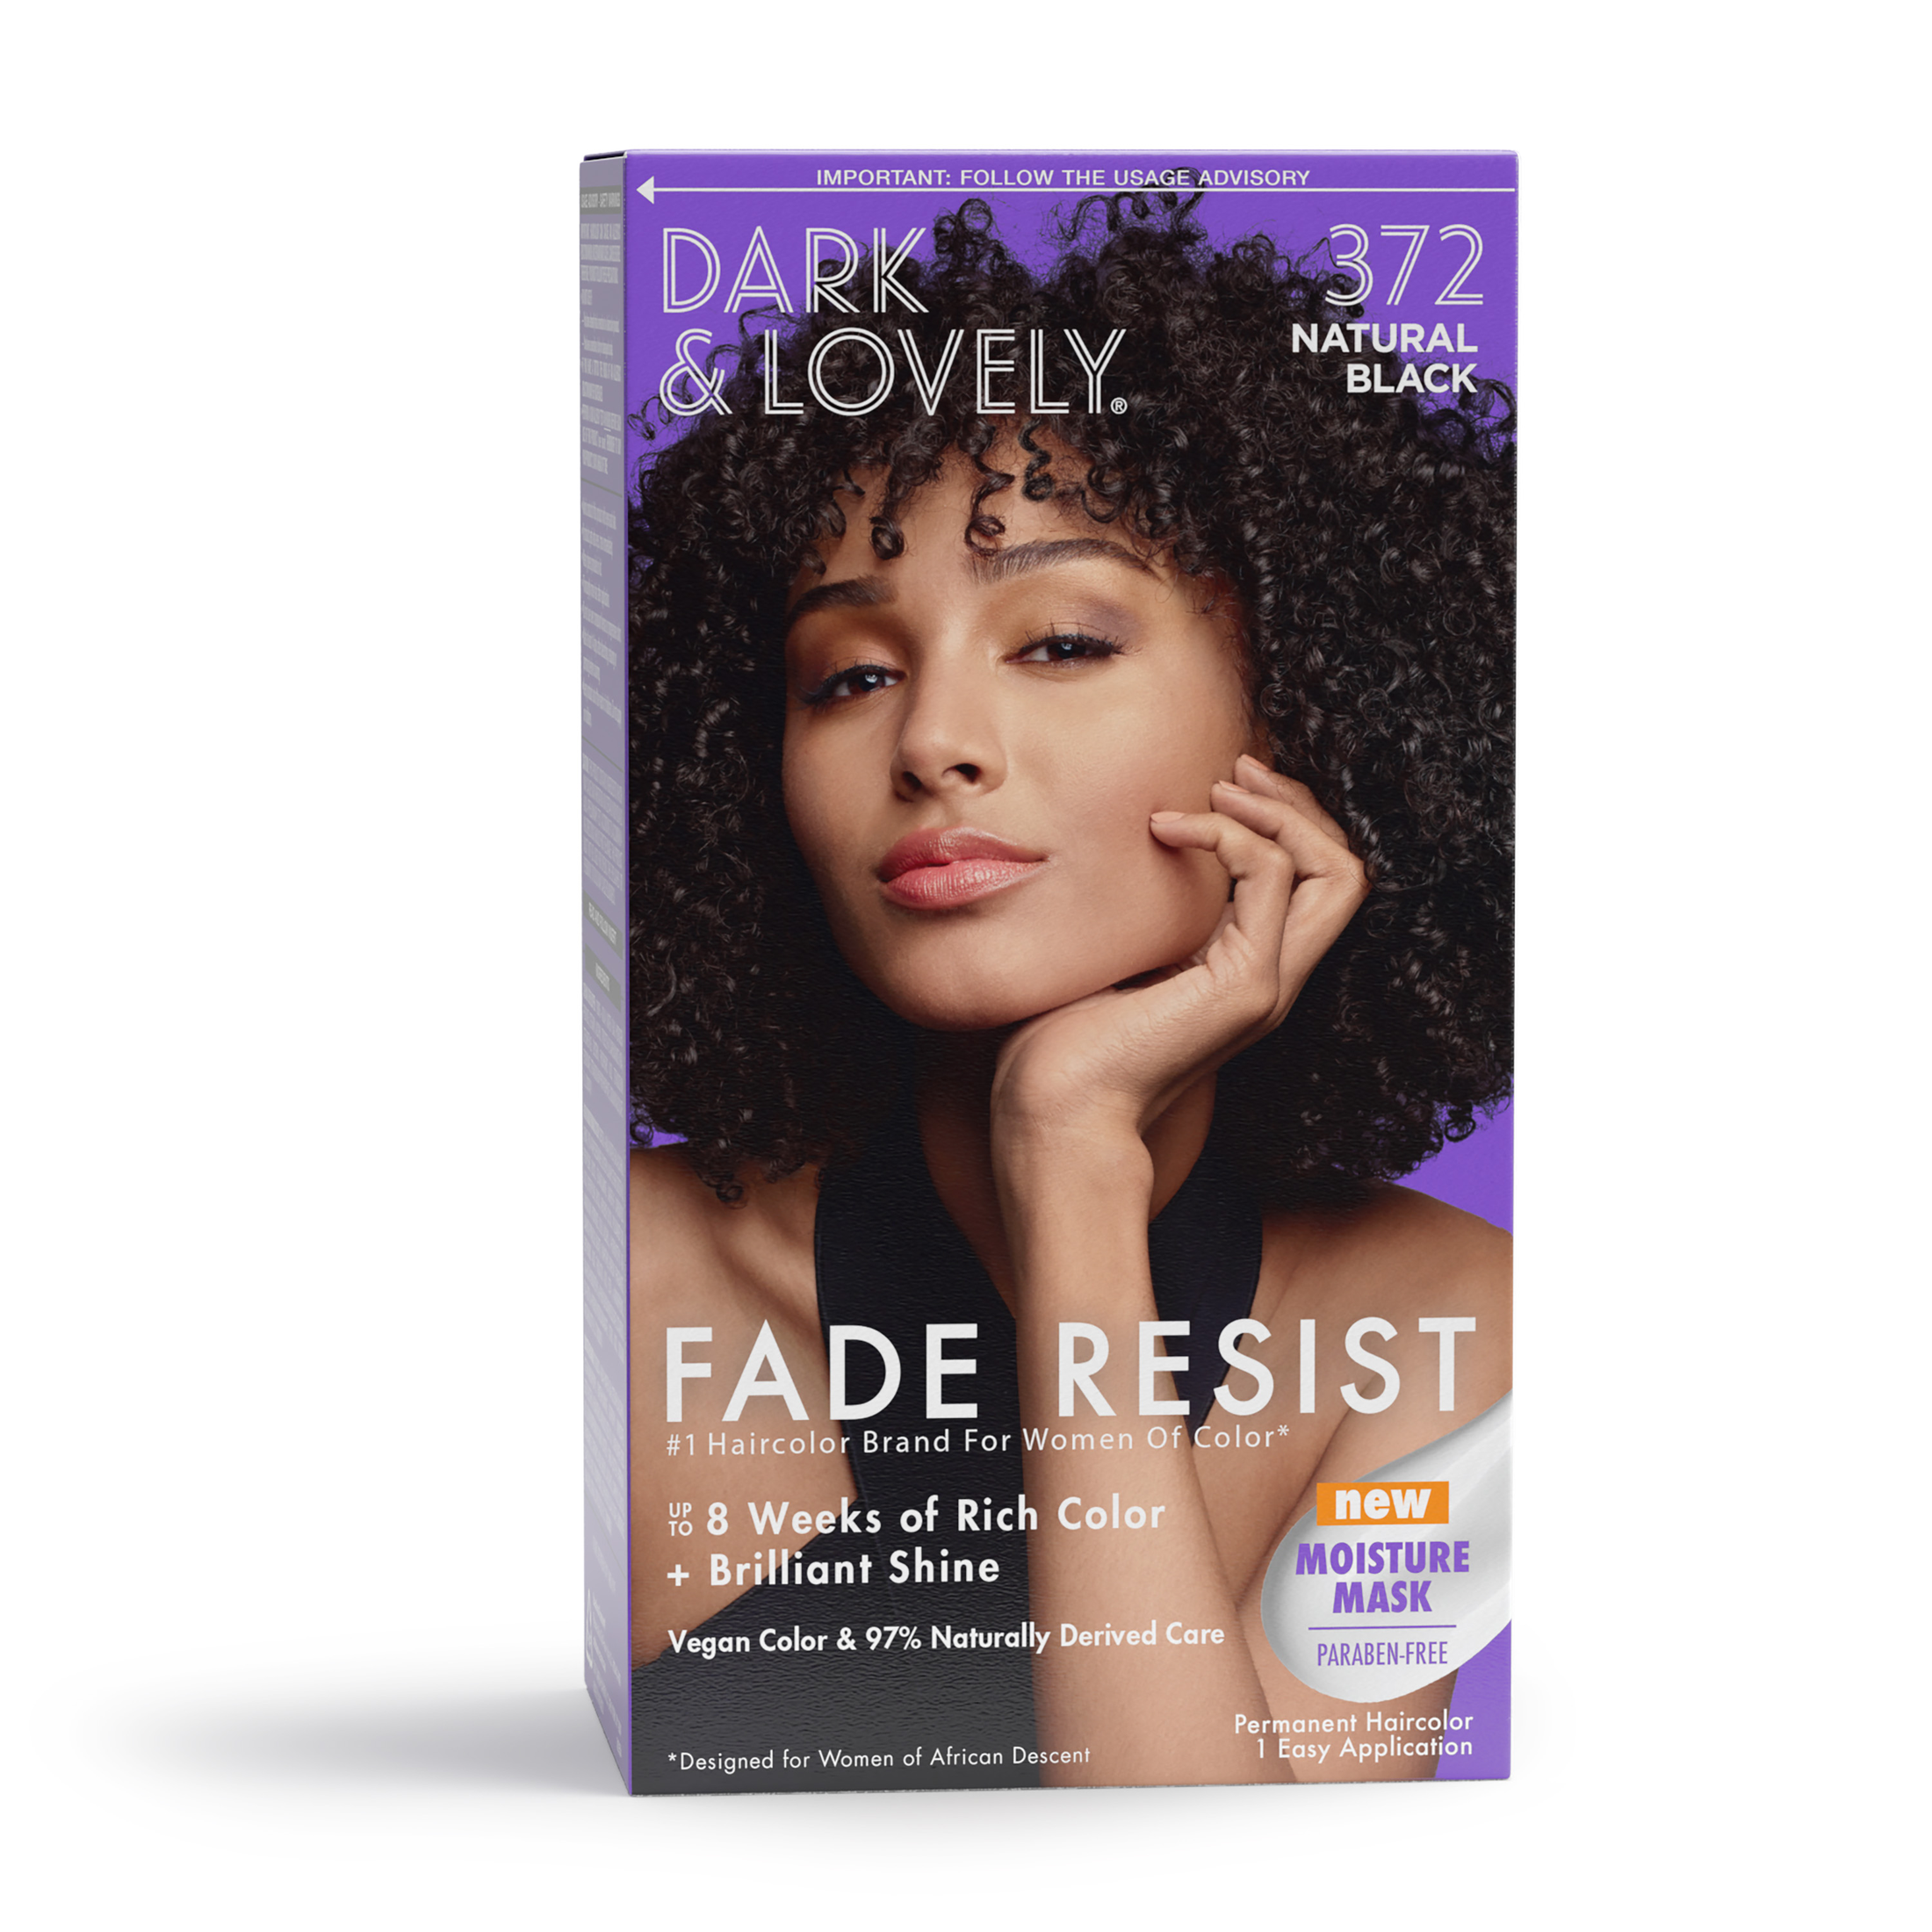 SoftSheen-Carson Dark and Lovely Fade Resist Hair Color, 372 Natural Black - image 1 of 13